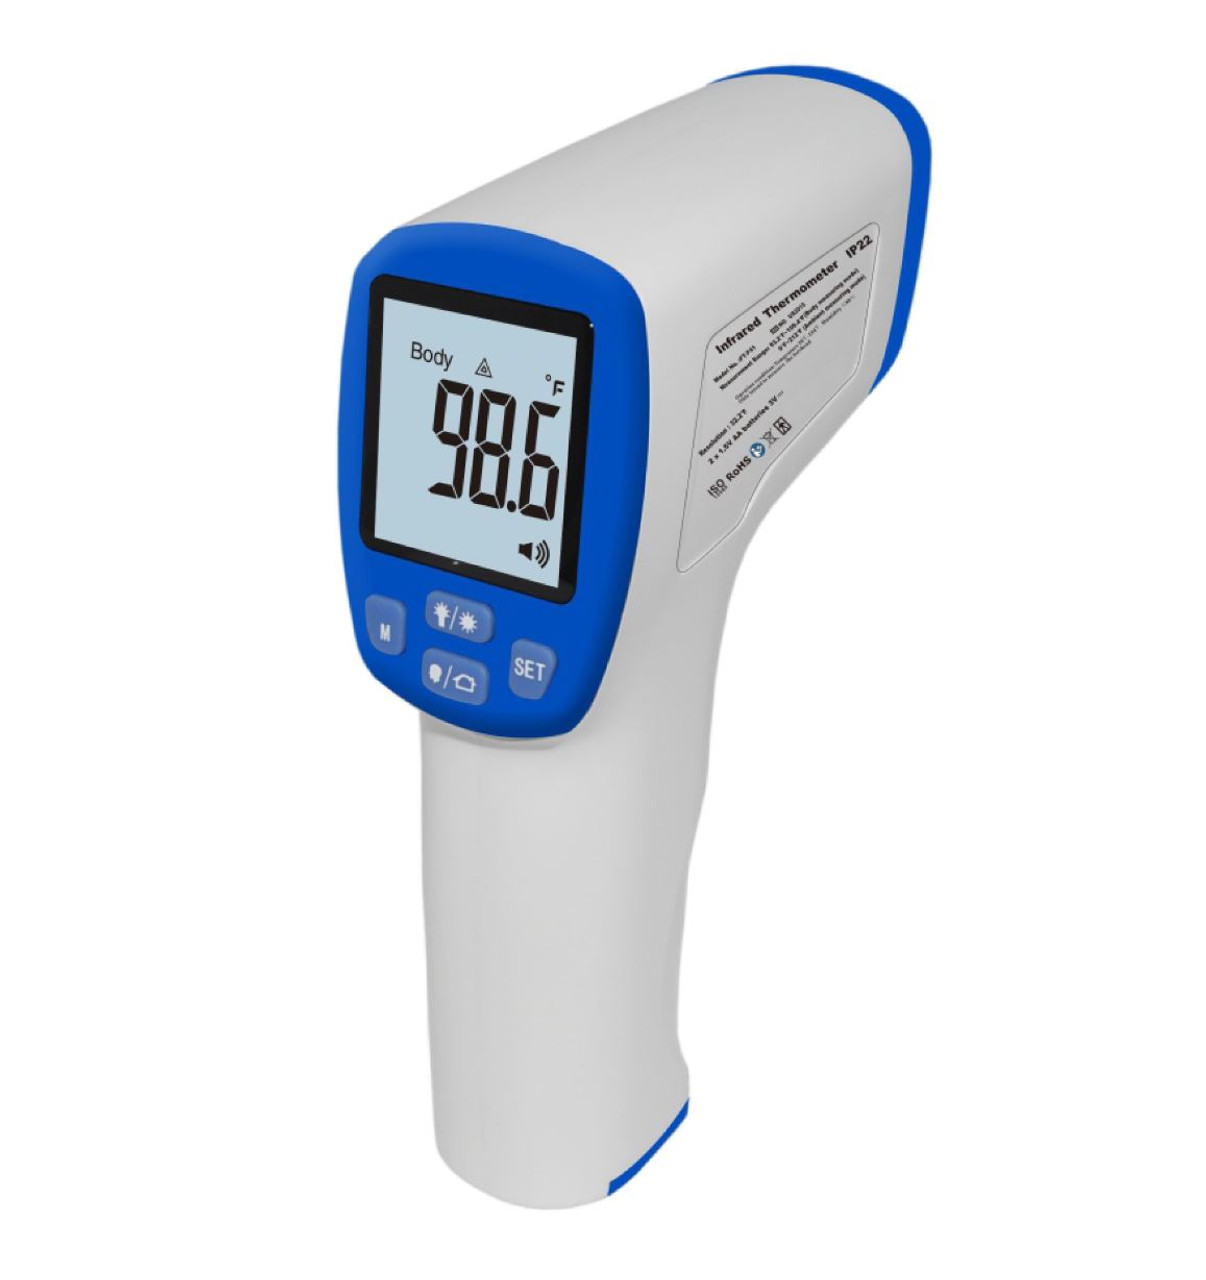 https://cdn11.bigcommerce.com/s-3t39xi9zbs/images/stencil/1280x1280/products/1512/1801/481109_infrared_thermometer__28858.1595436179.JPG?c=1